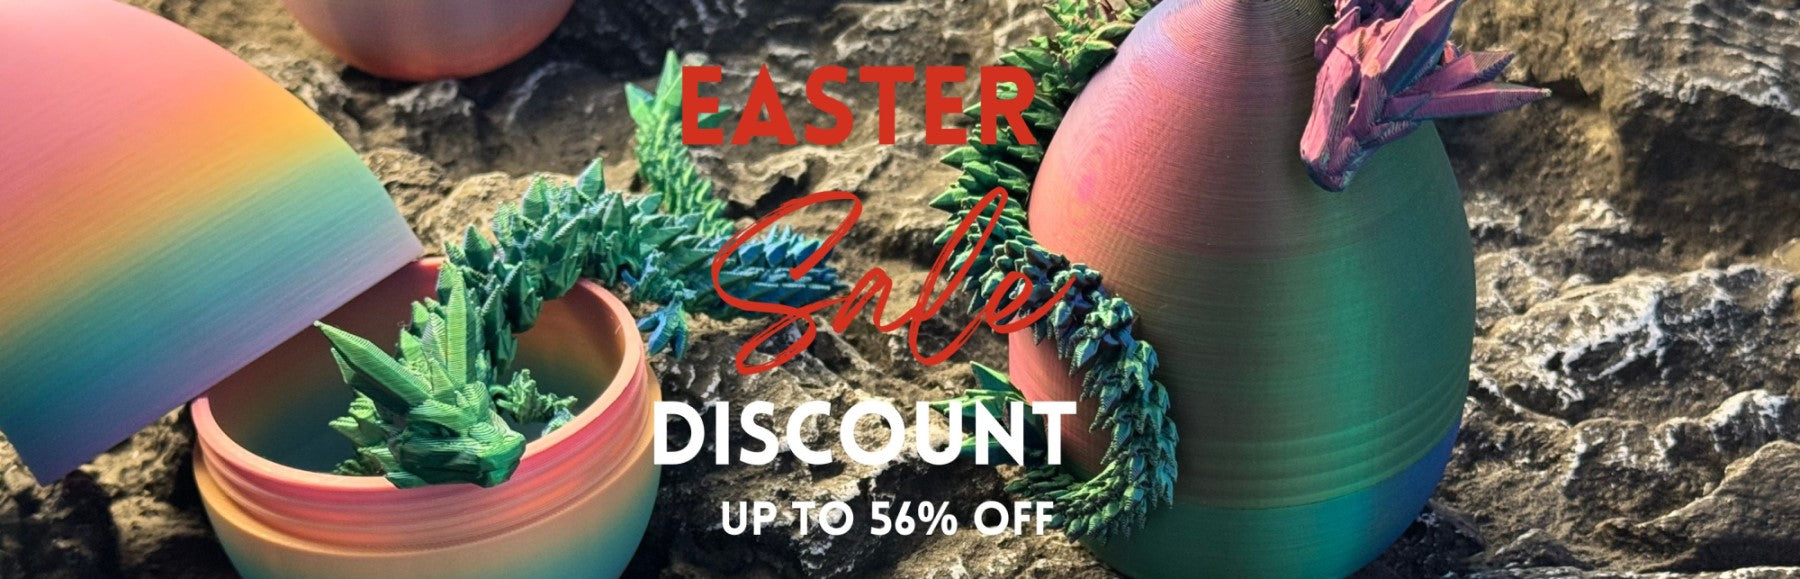 EASTER SALE | UP TO 56% OFF